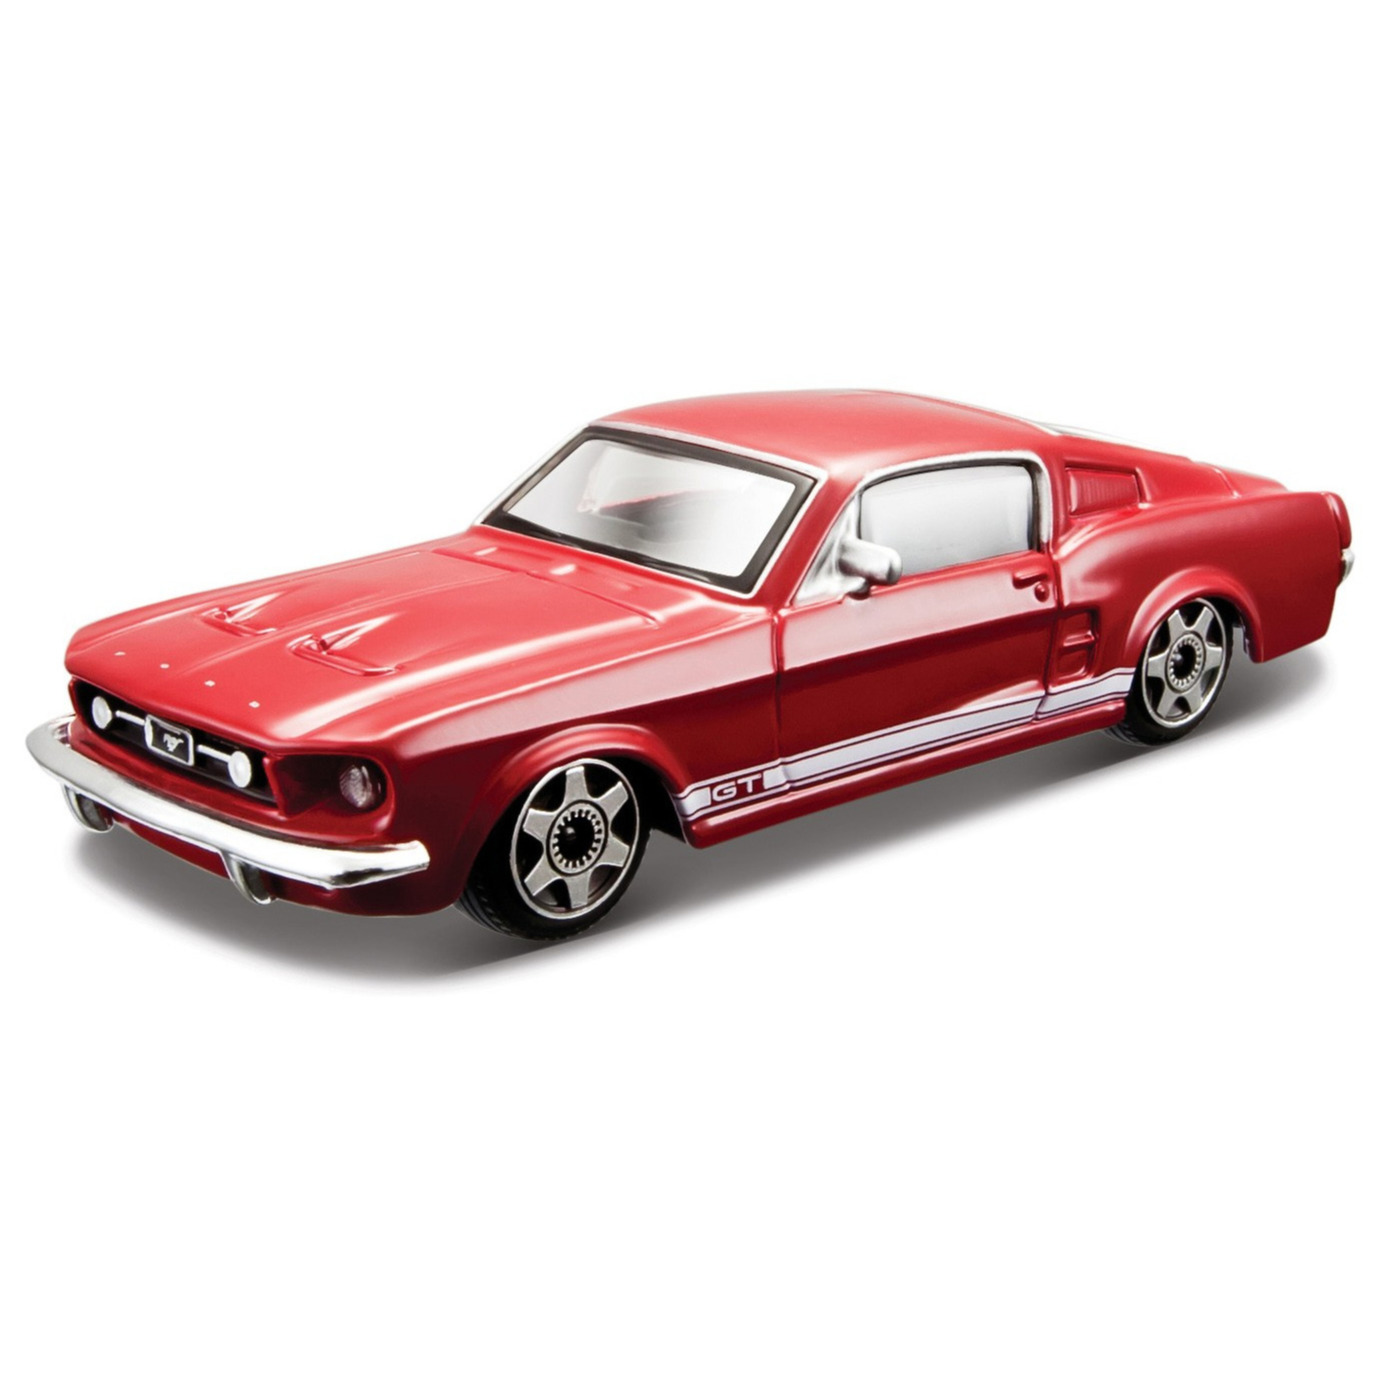 Modelauto Ford Mustang GT 1964 rood 10 cm 1:43